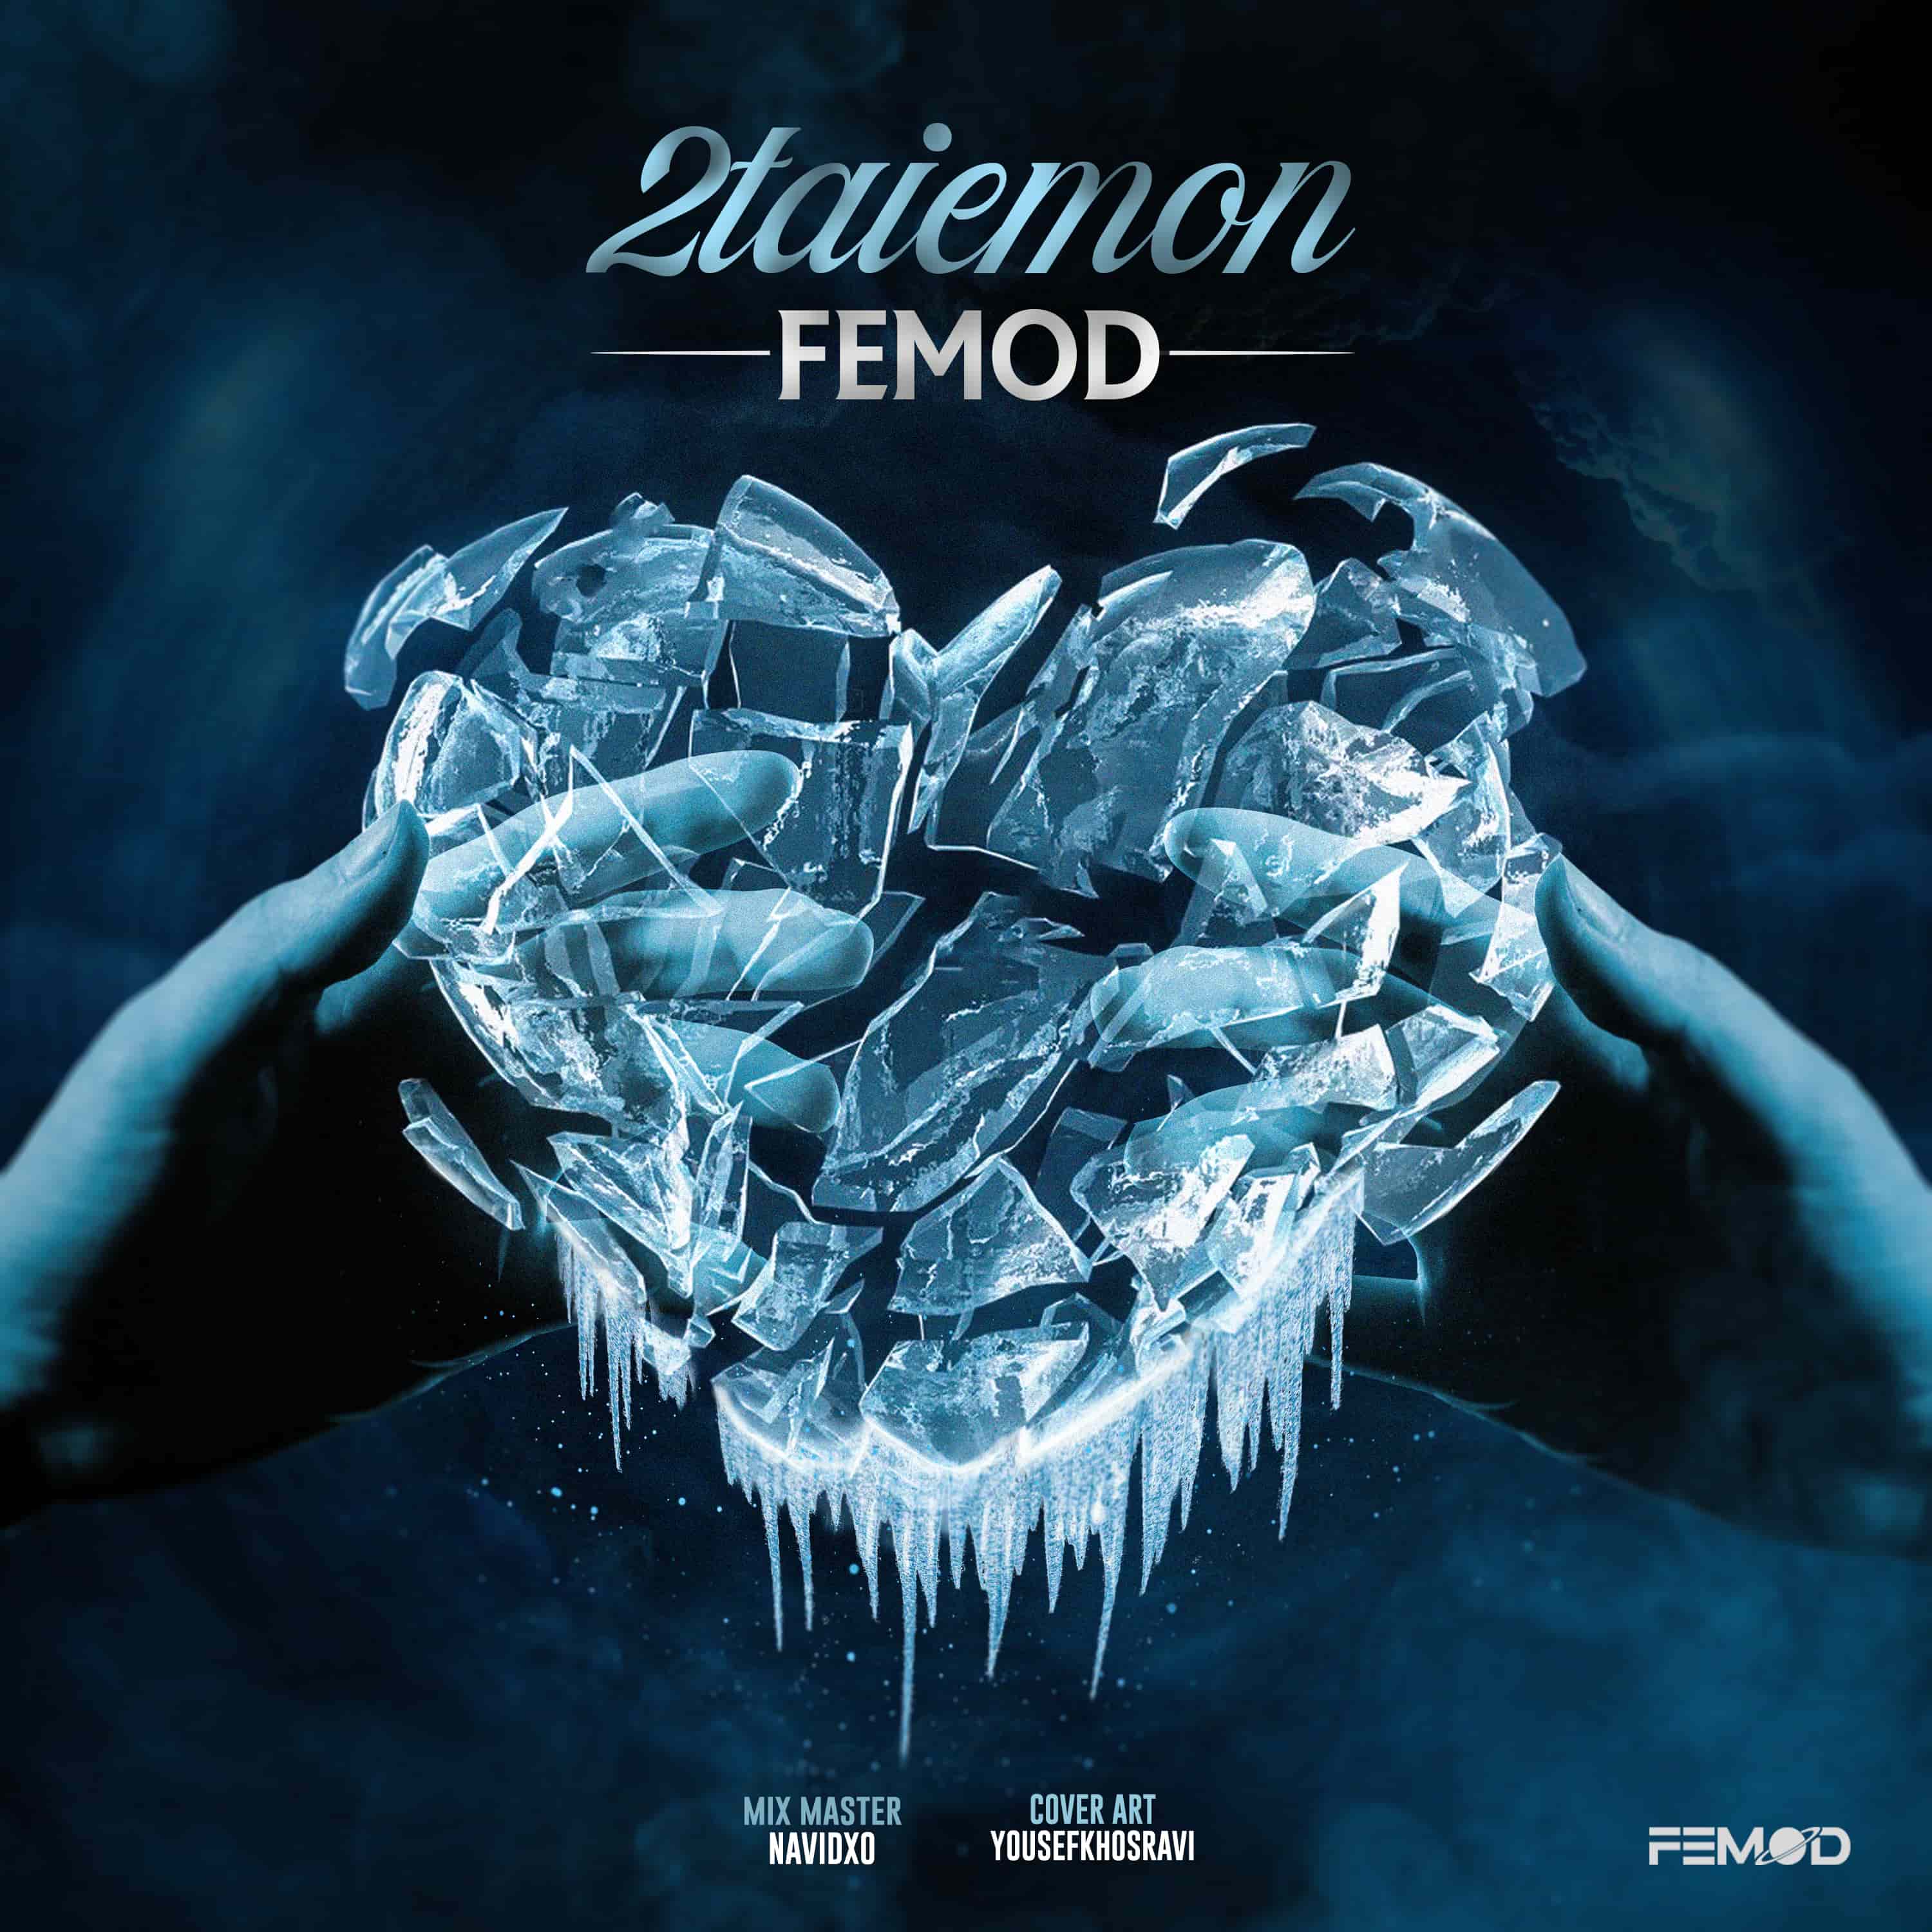 Cover 2taiemon Femod Design By @ikhosravy